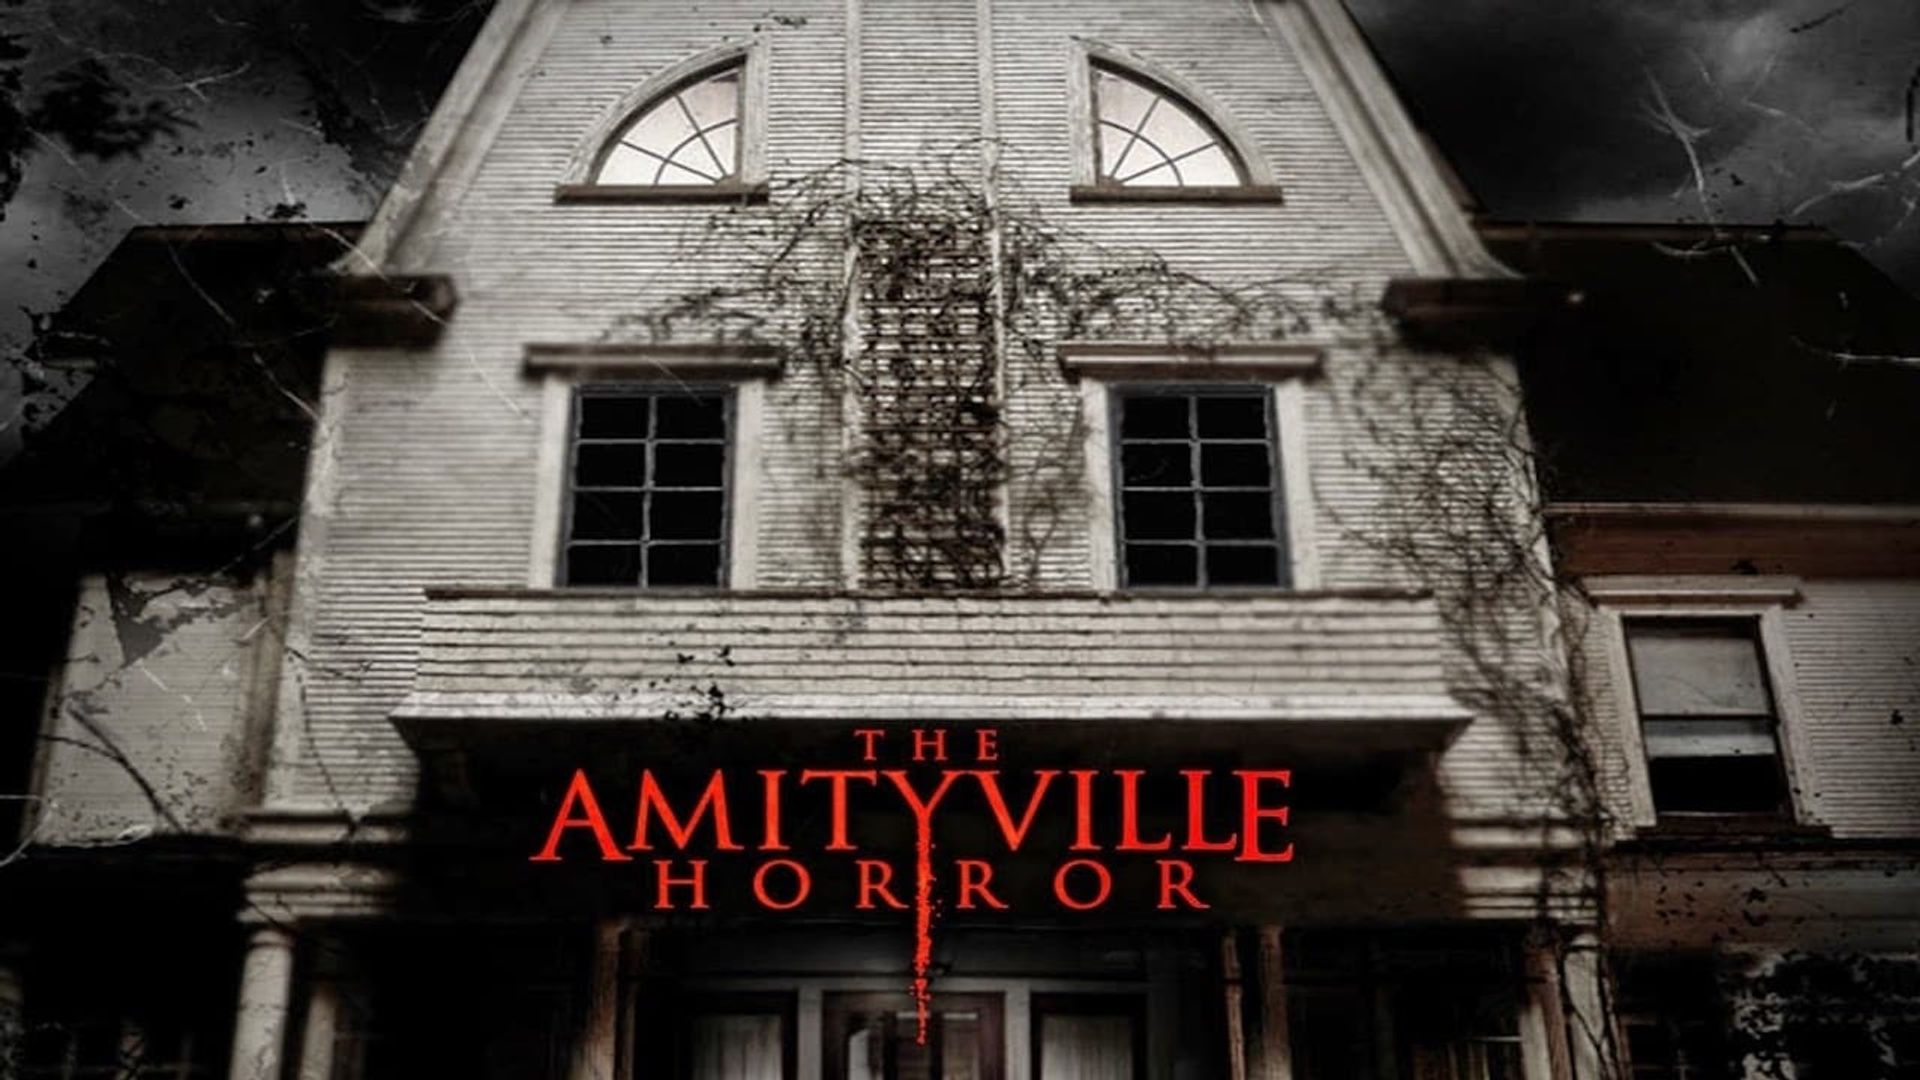 The Real Amityville Horror background